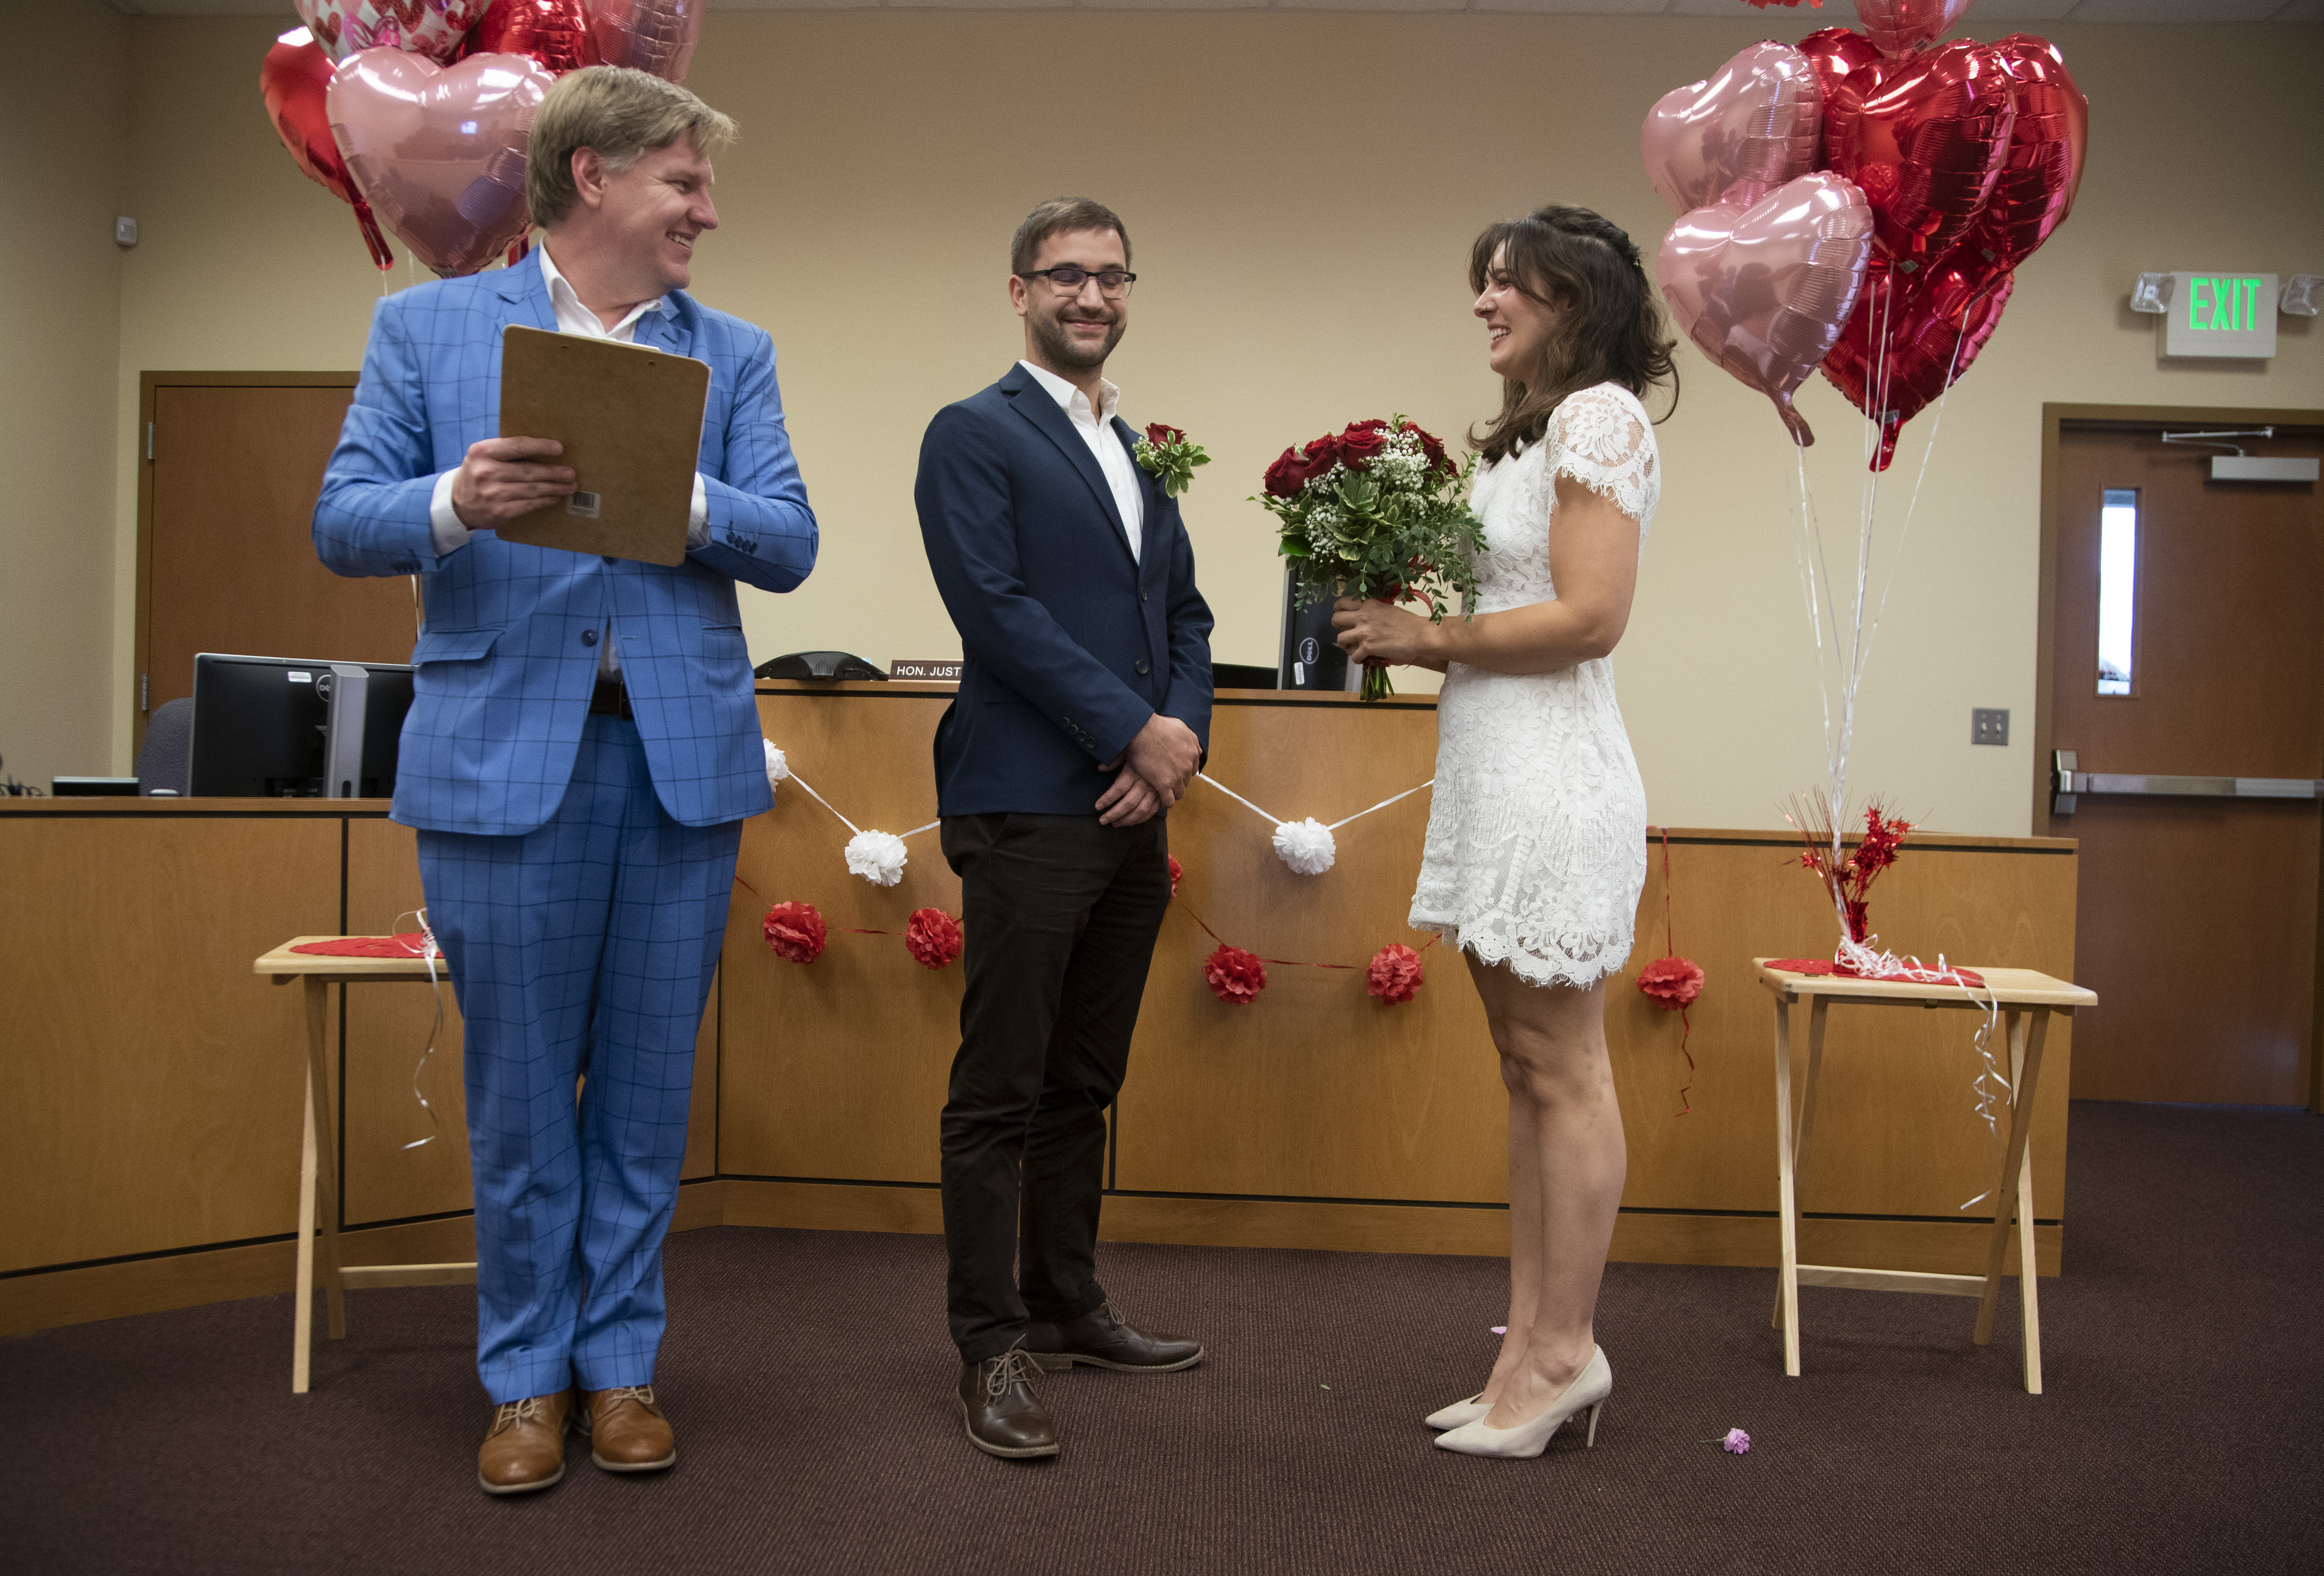 Diane Vivio, left, and Kyle Libra were married at the Marion County Justice Court in Salem, February 14, 2023. Beth Nakamura/The Oregonian